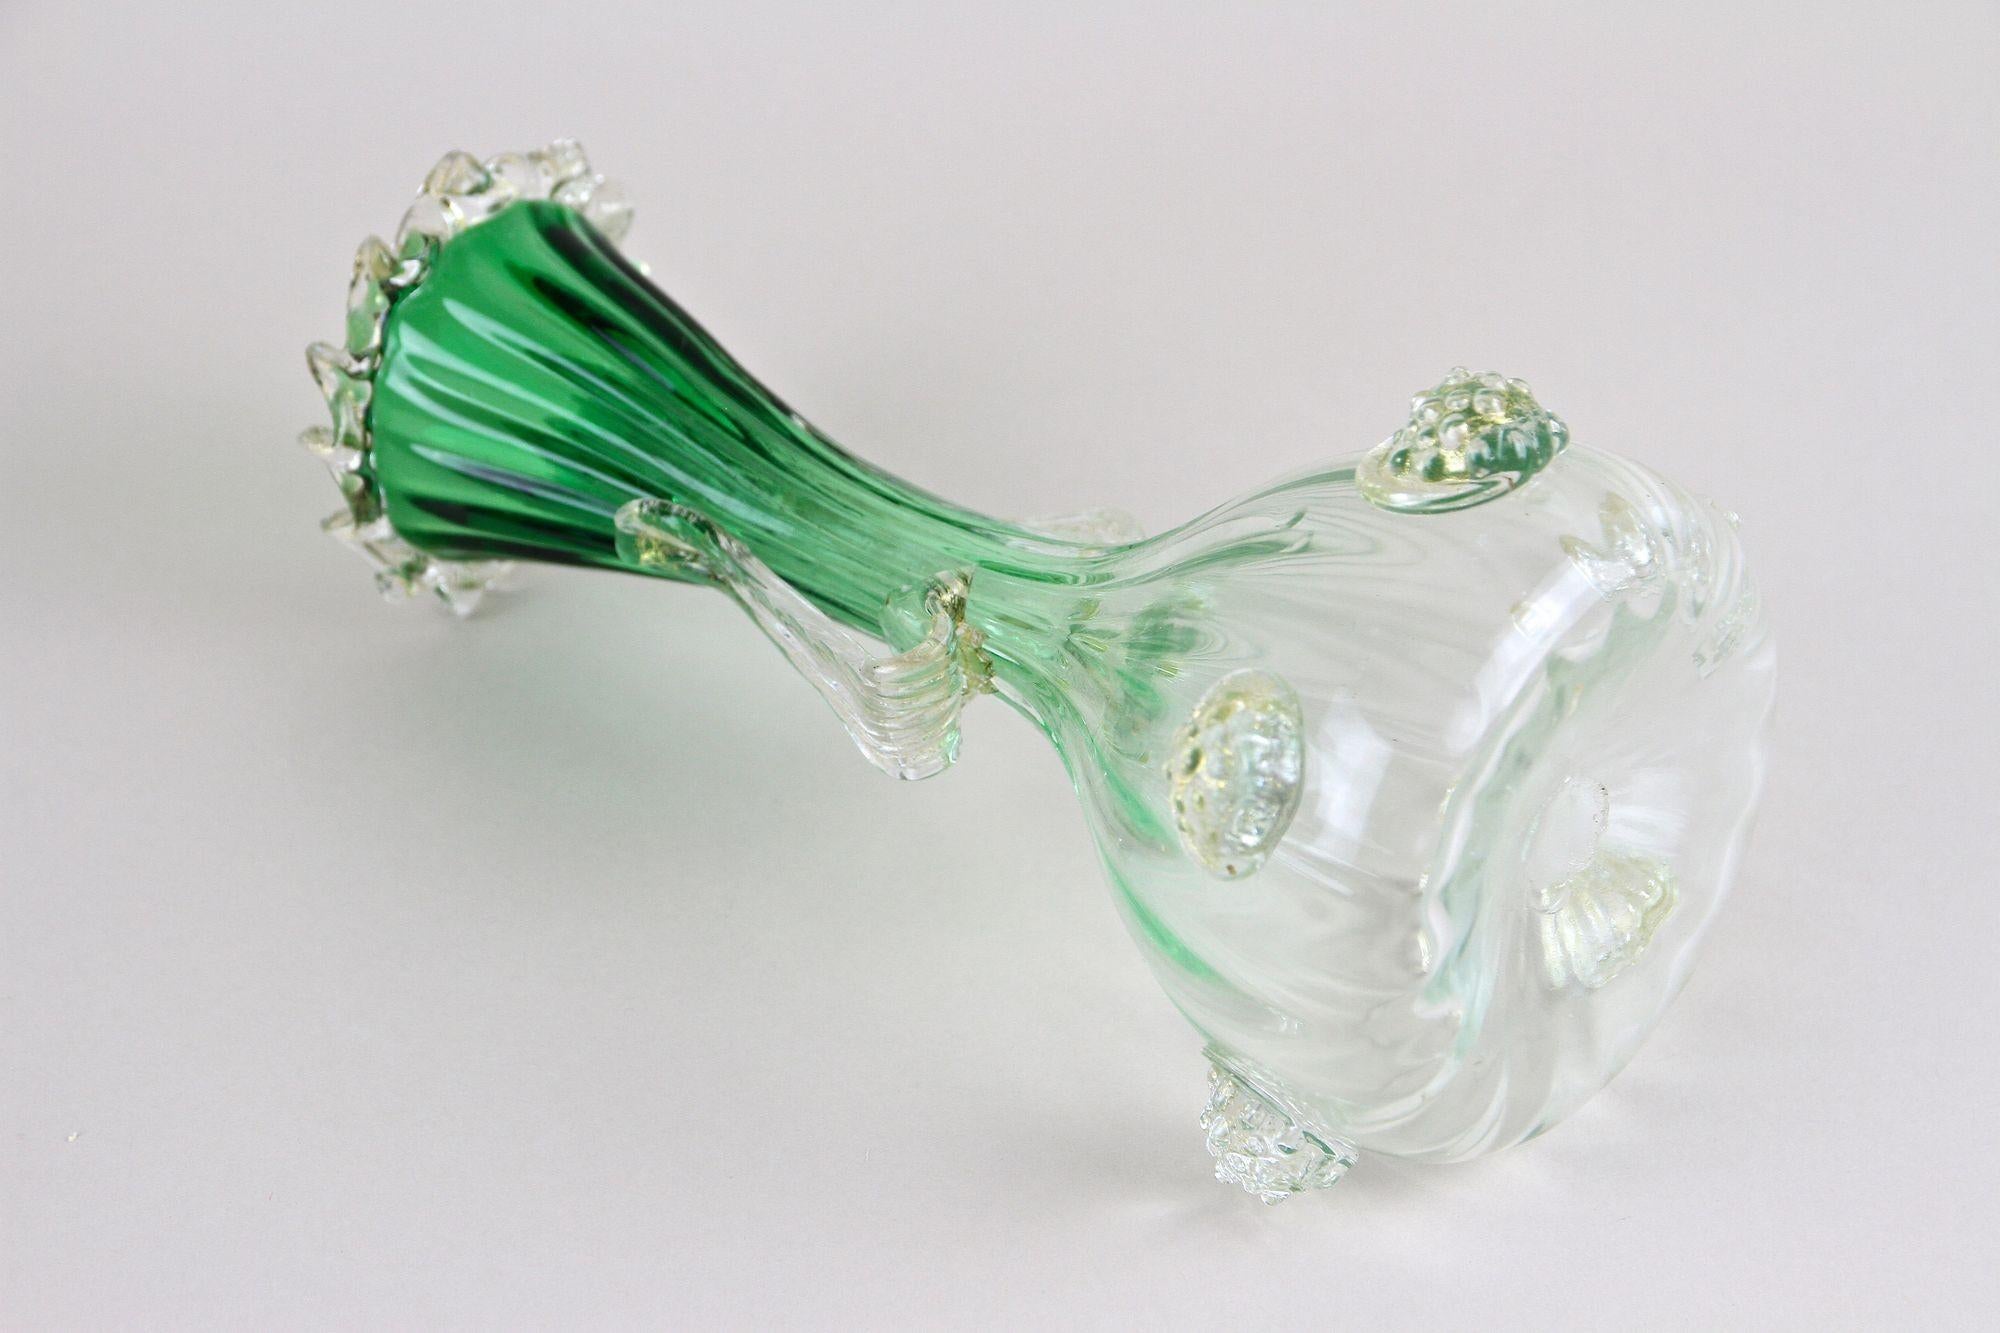 Green/ White Murano Glass Vase With 24k Gold Flakes by Fratelli Toso, IT ca 1930 For Sale 4